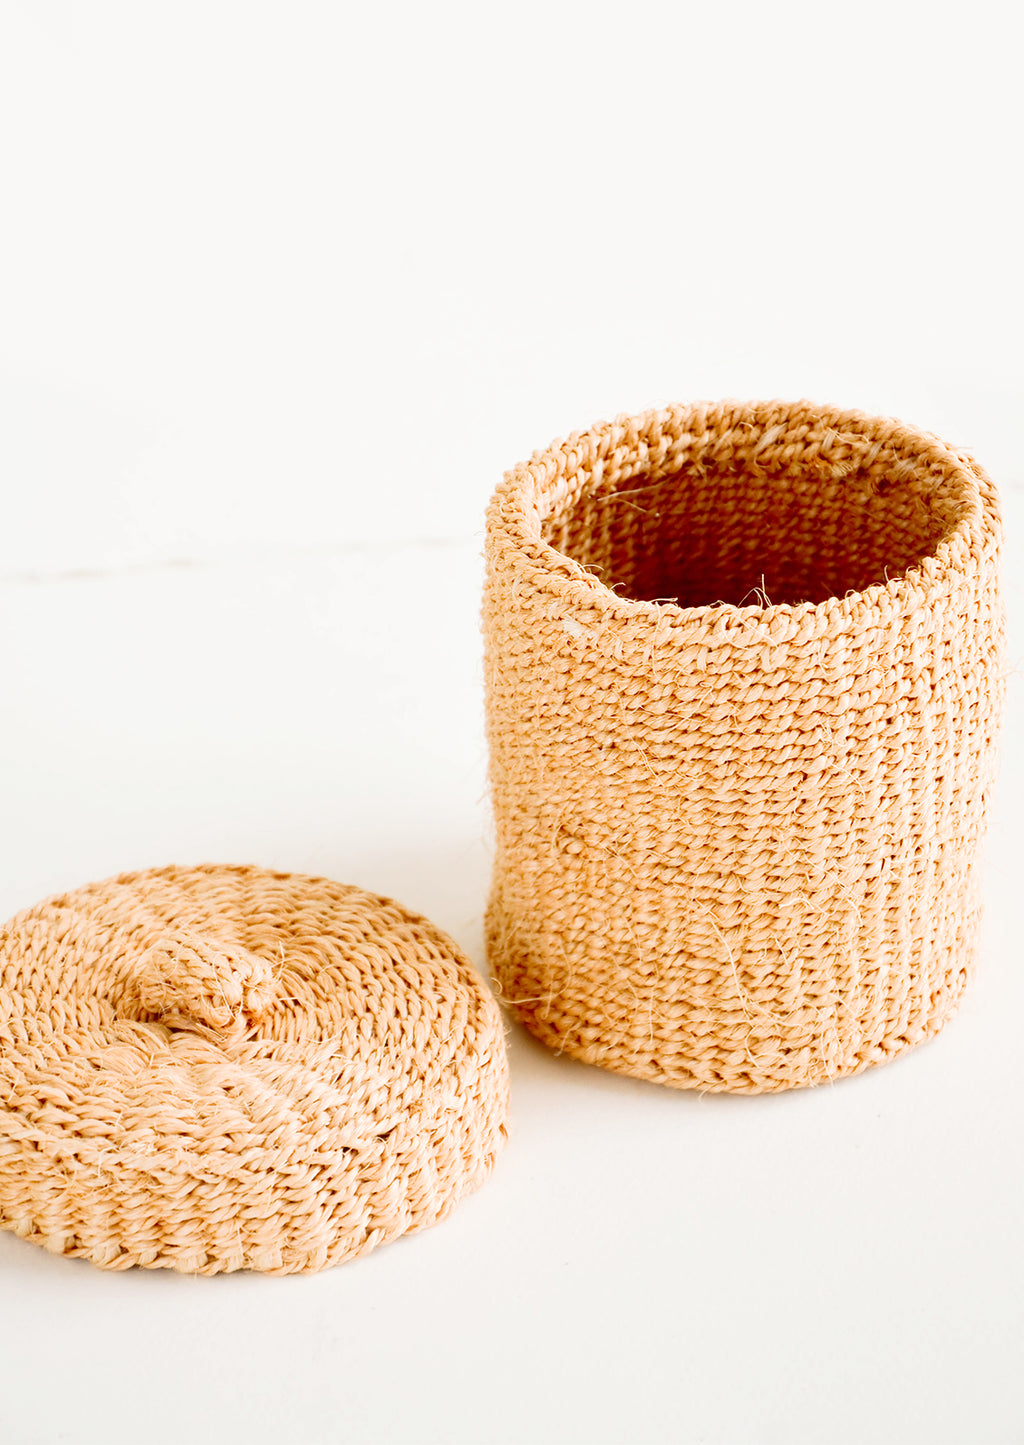 2: Small, round woven basket with matching lid made from peach-colored sisal